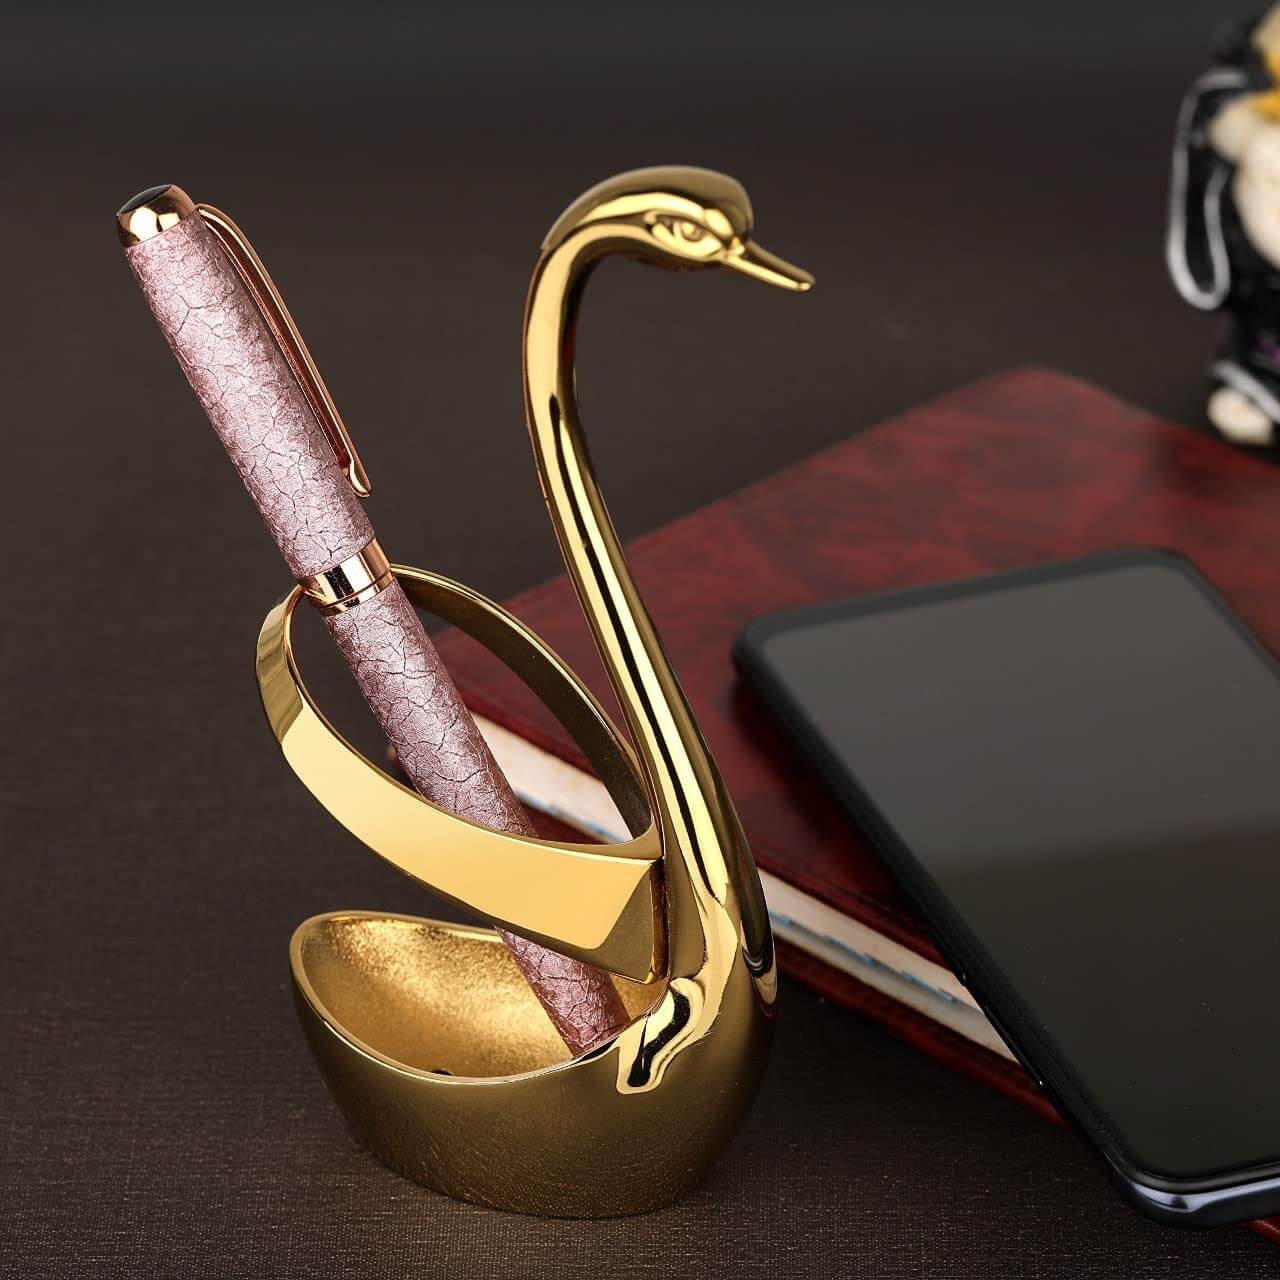 ROSTON Pen Stand with Pen, Holder Stand Office Desk Organizer Gold swan Corporate Gifts